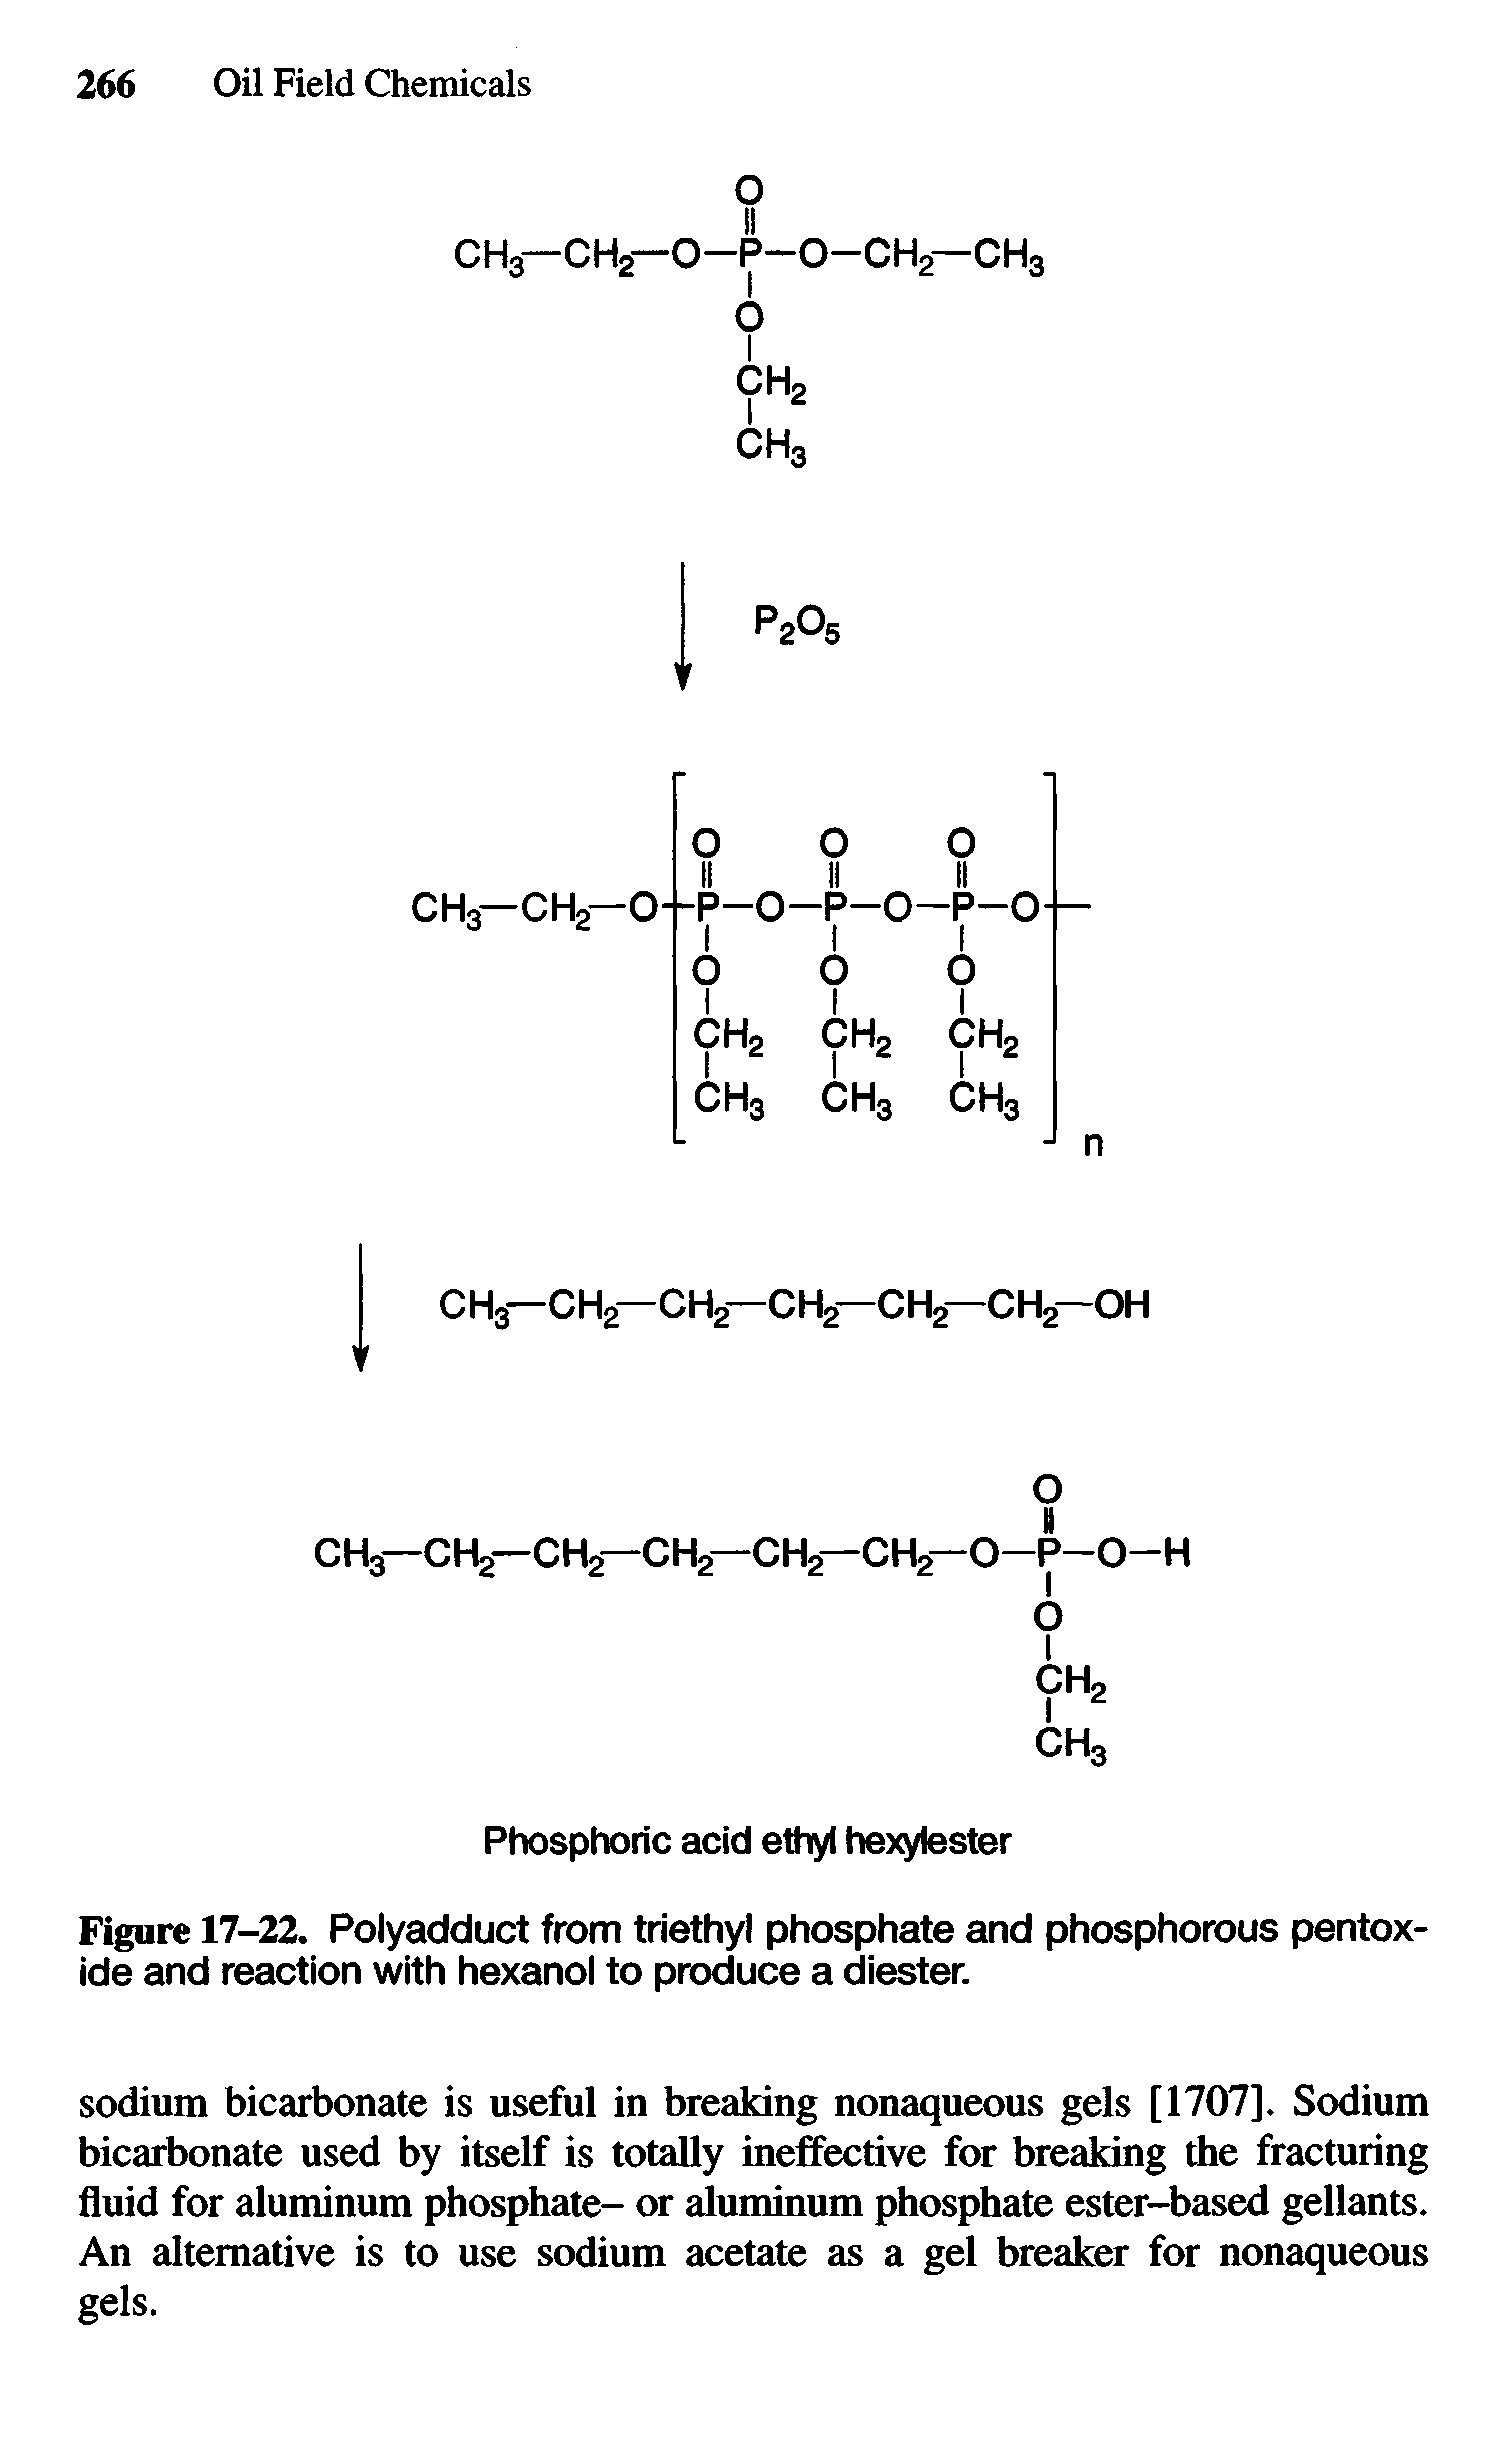 Figure 17-22. Polyadduct from triethyl phosphate and phosphorous pentox-ide and reaction with hexanol to produce a diester.